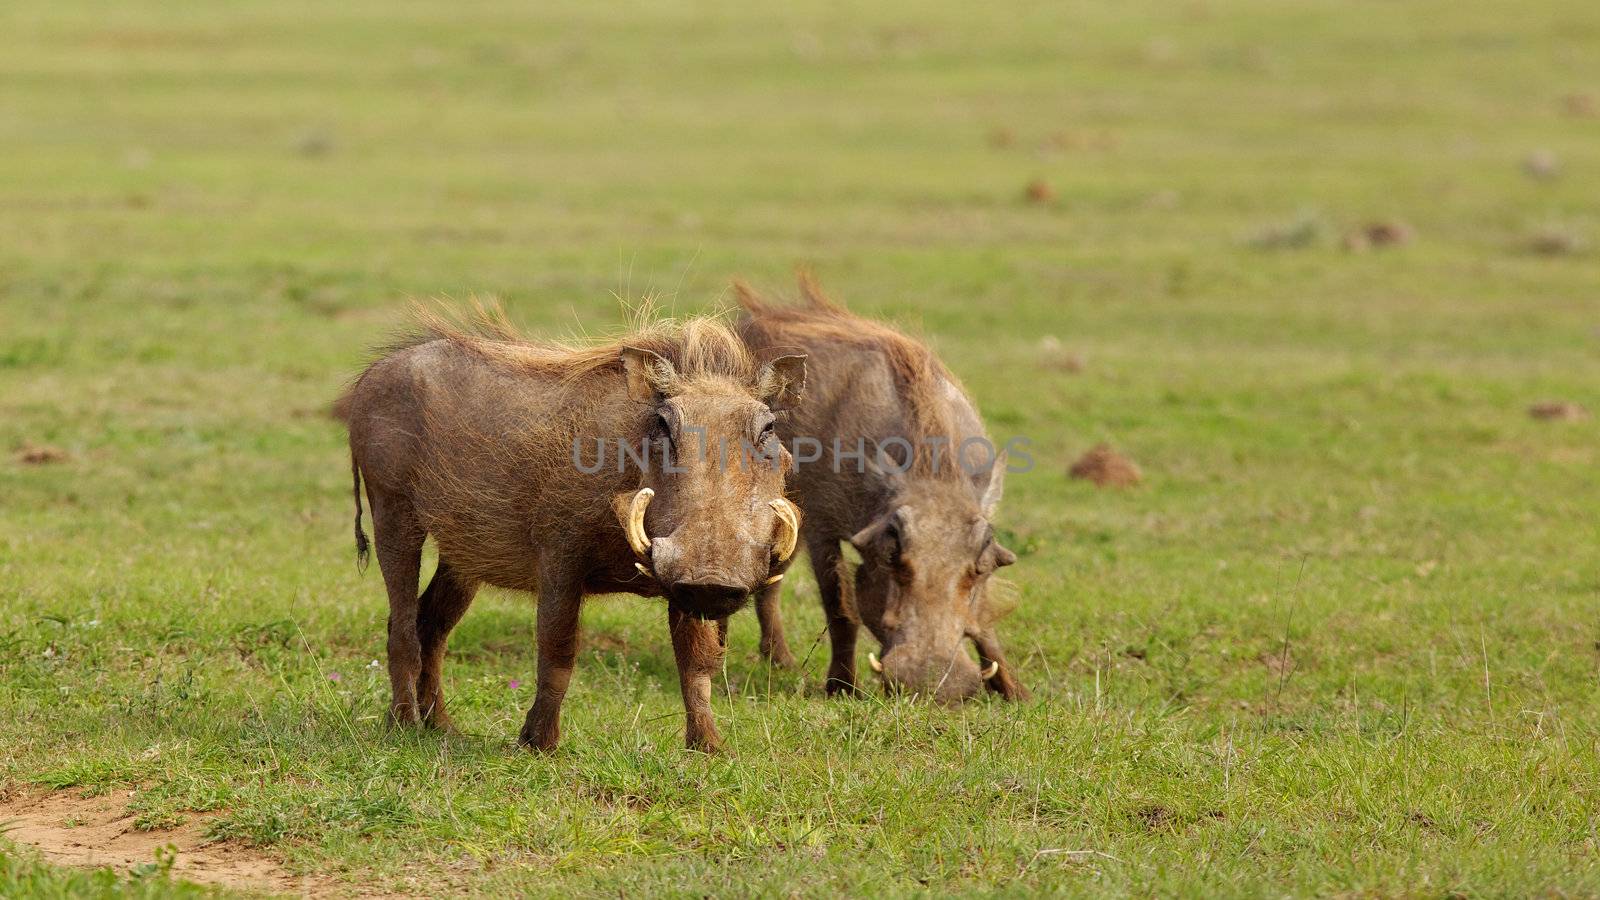 Warthogs (Phacochoerus aethiopicus) in the Addo Elephant National Park, South Africa.